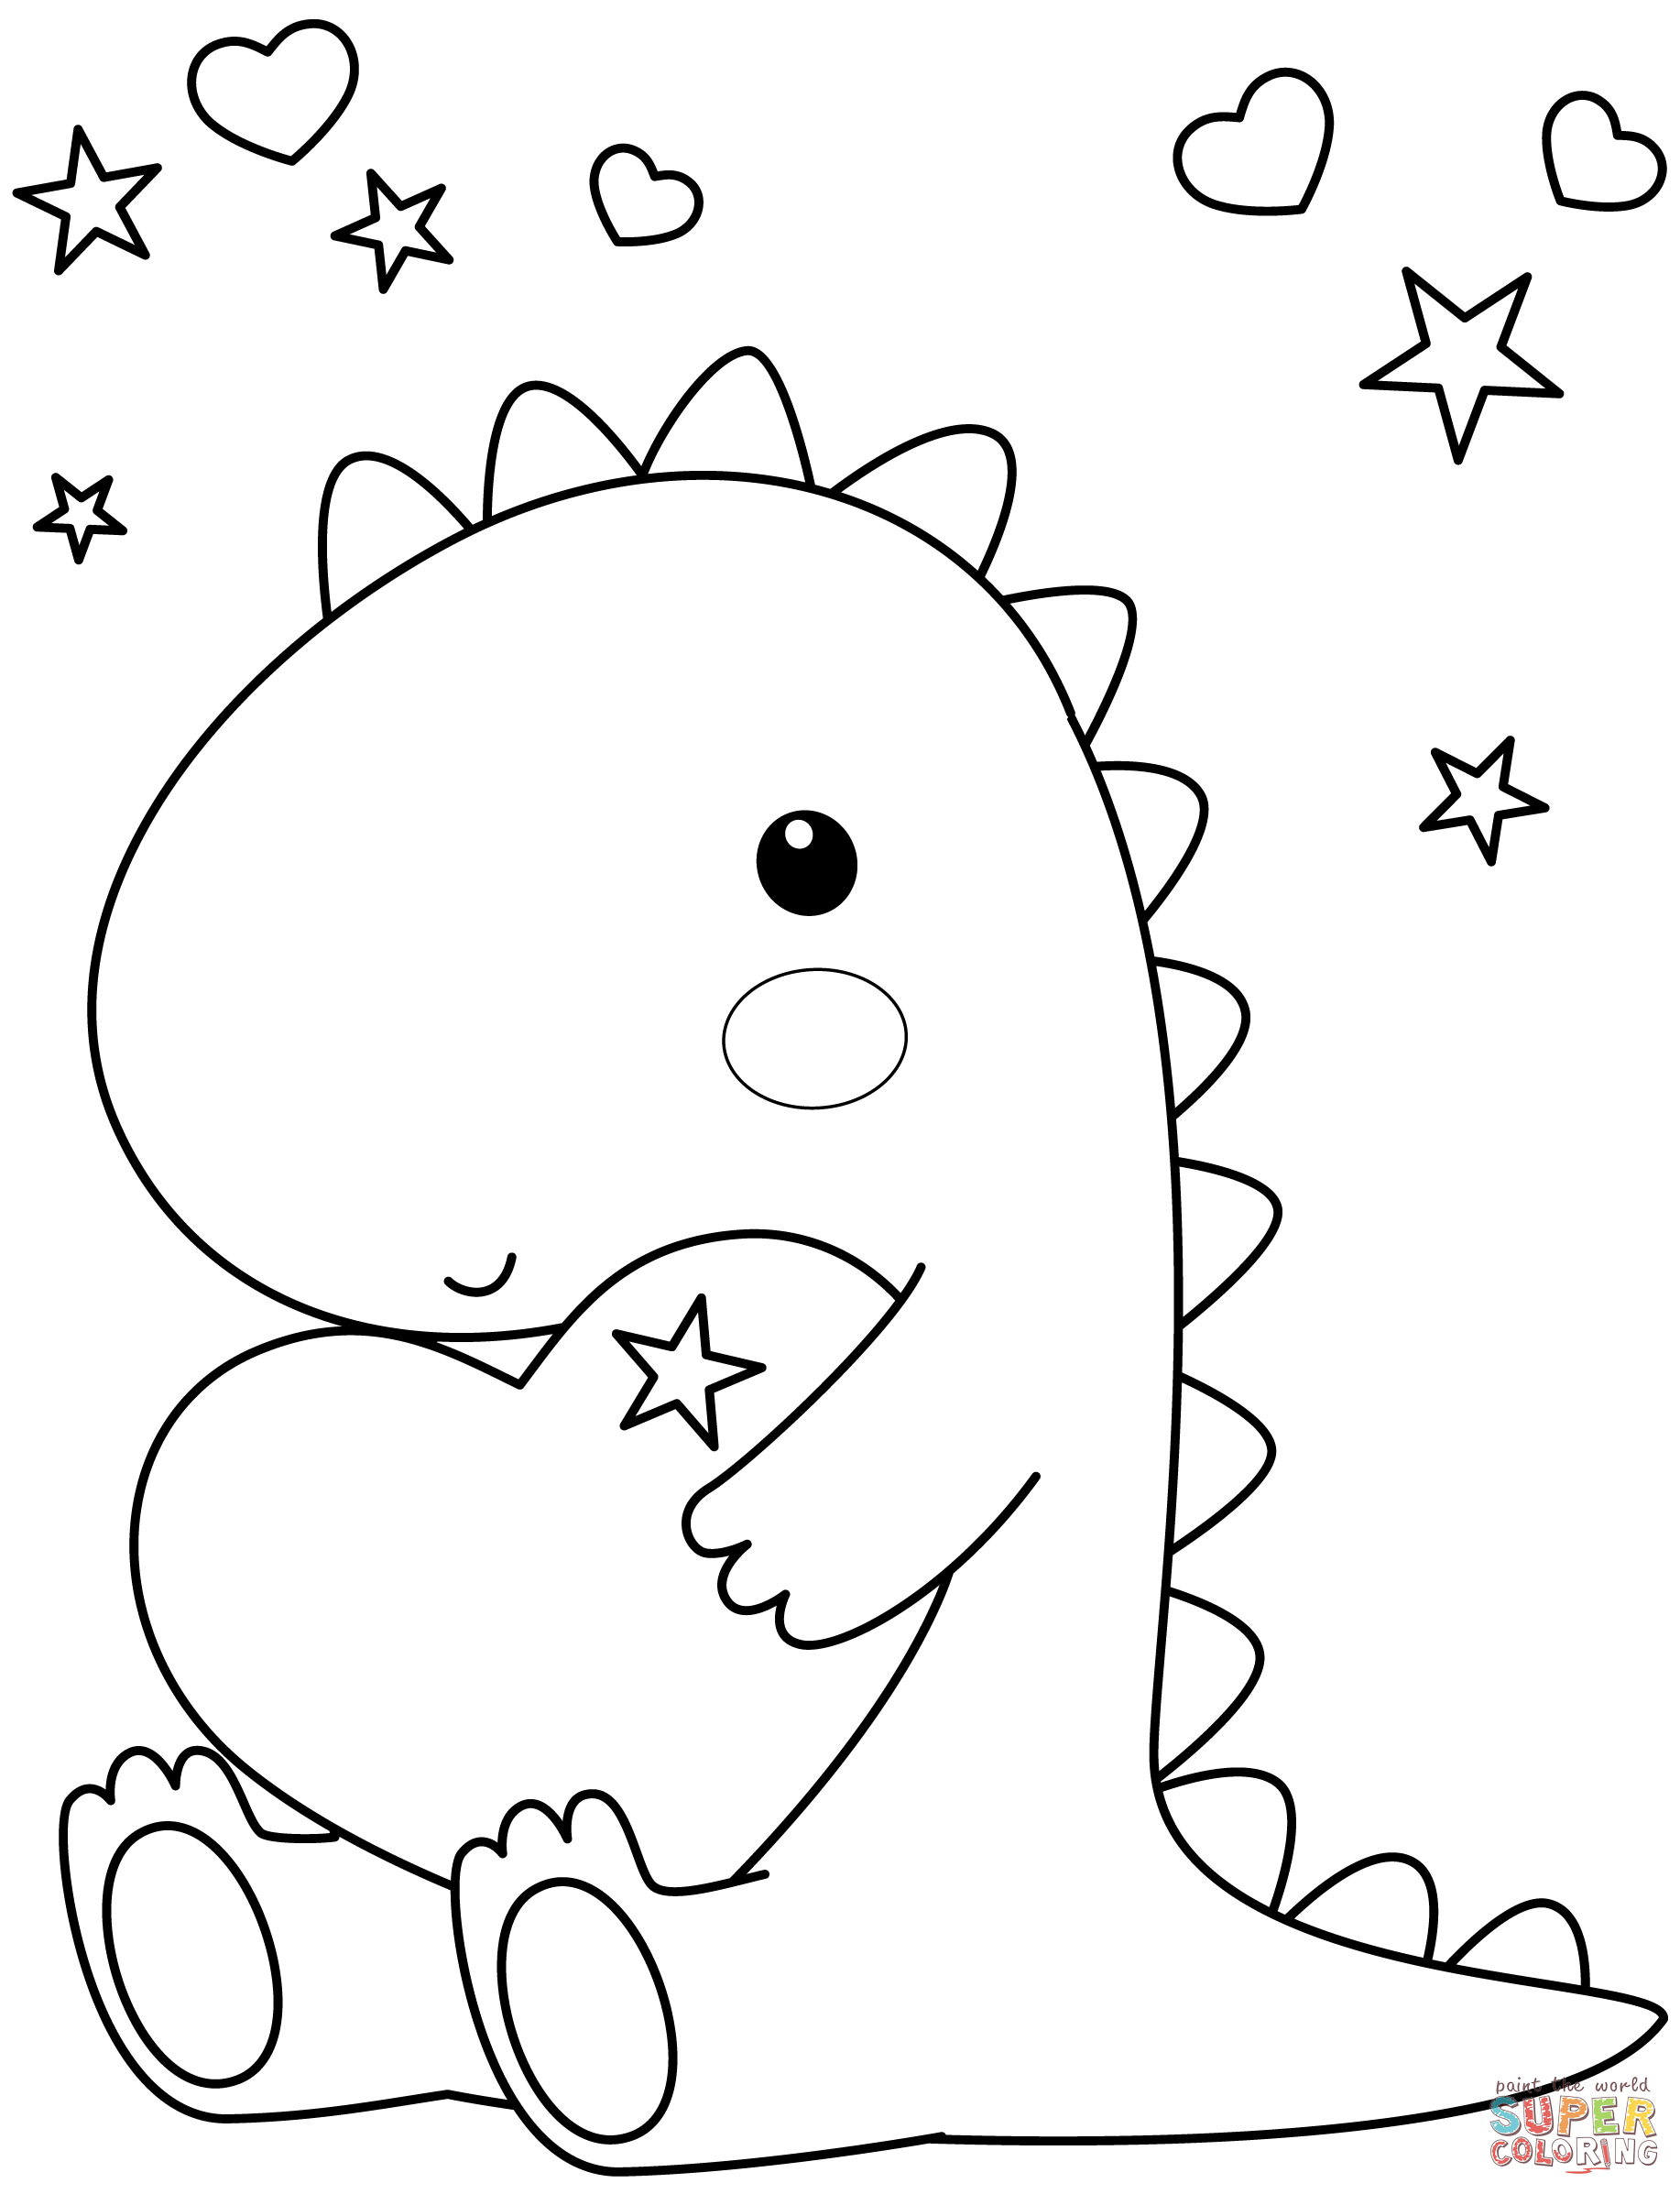 Kawaii dinosaur with heart coloring page free printable coloring pages